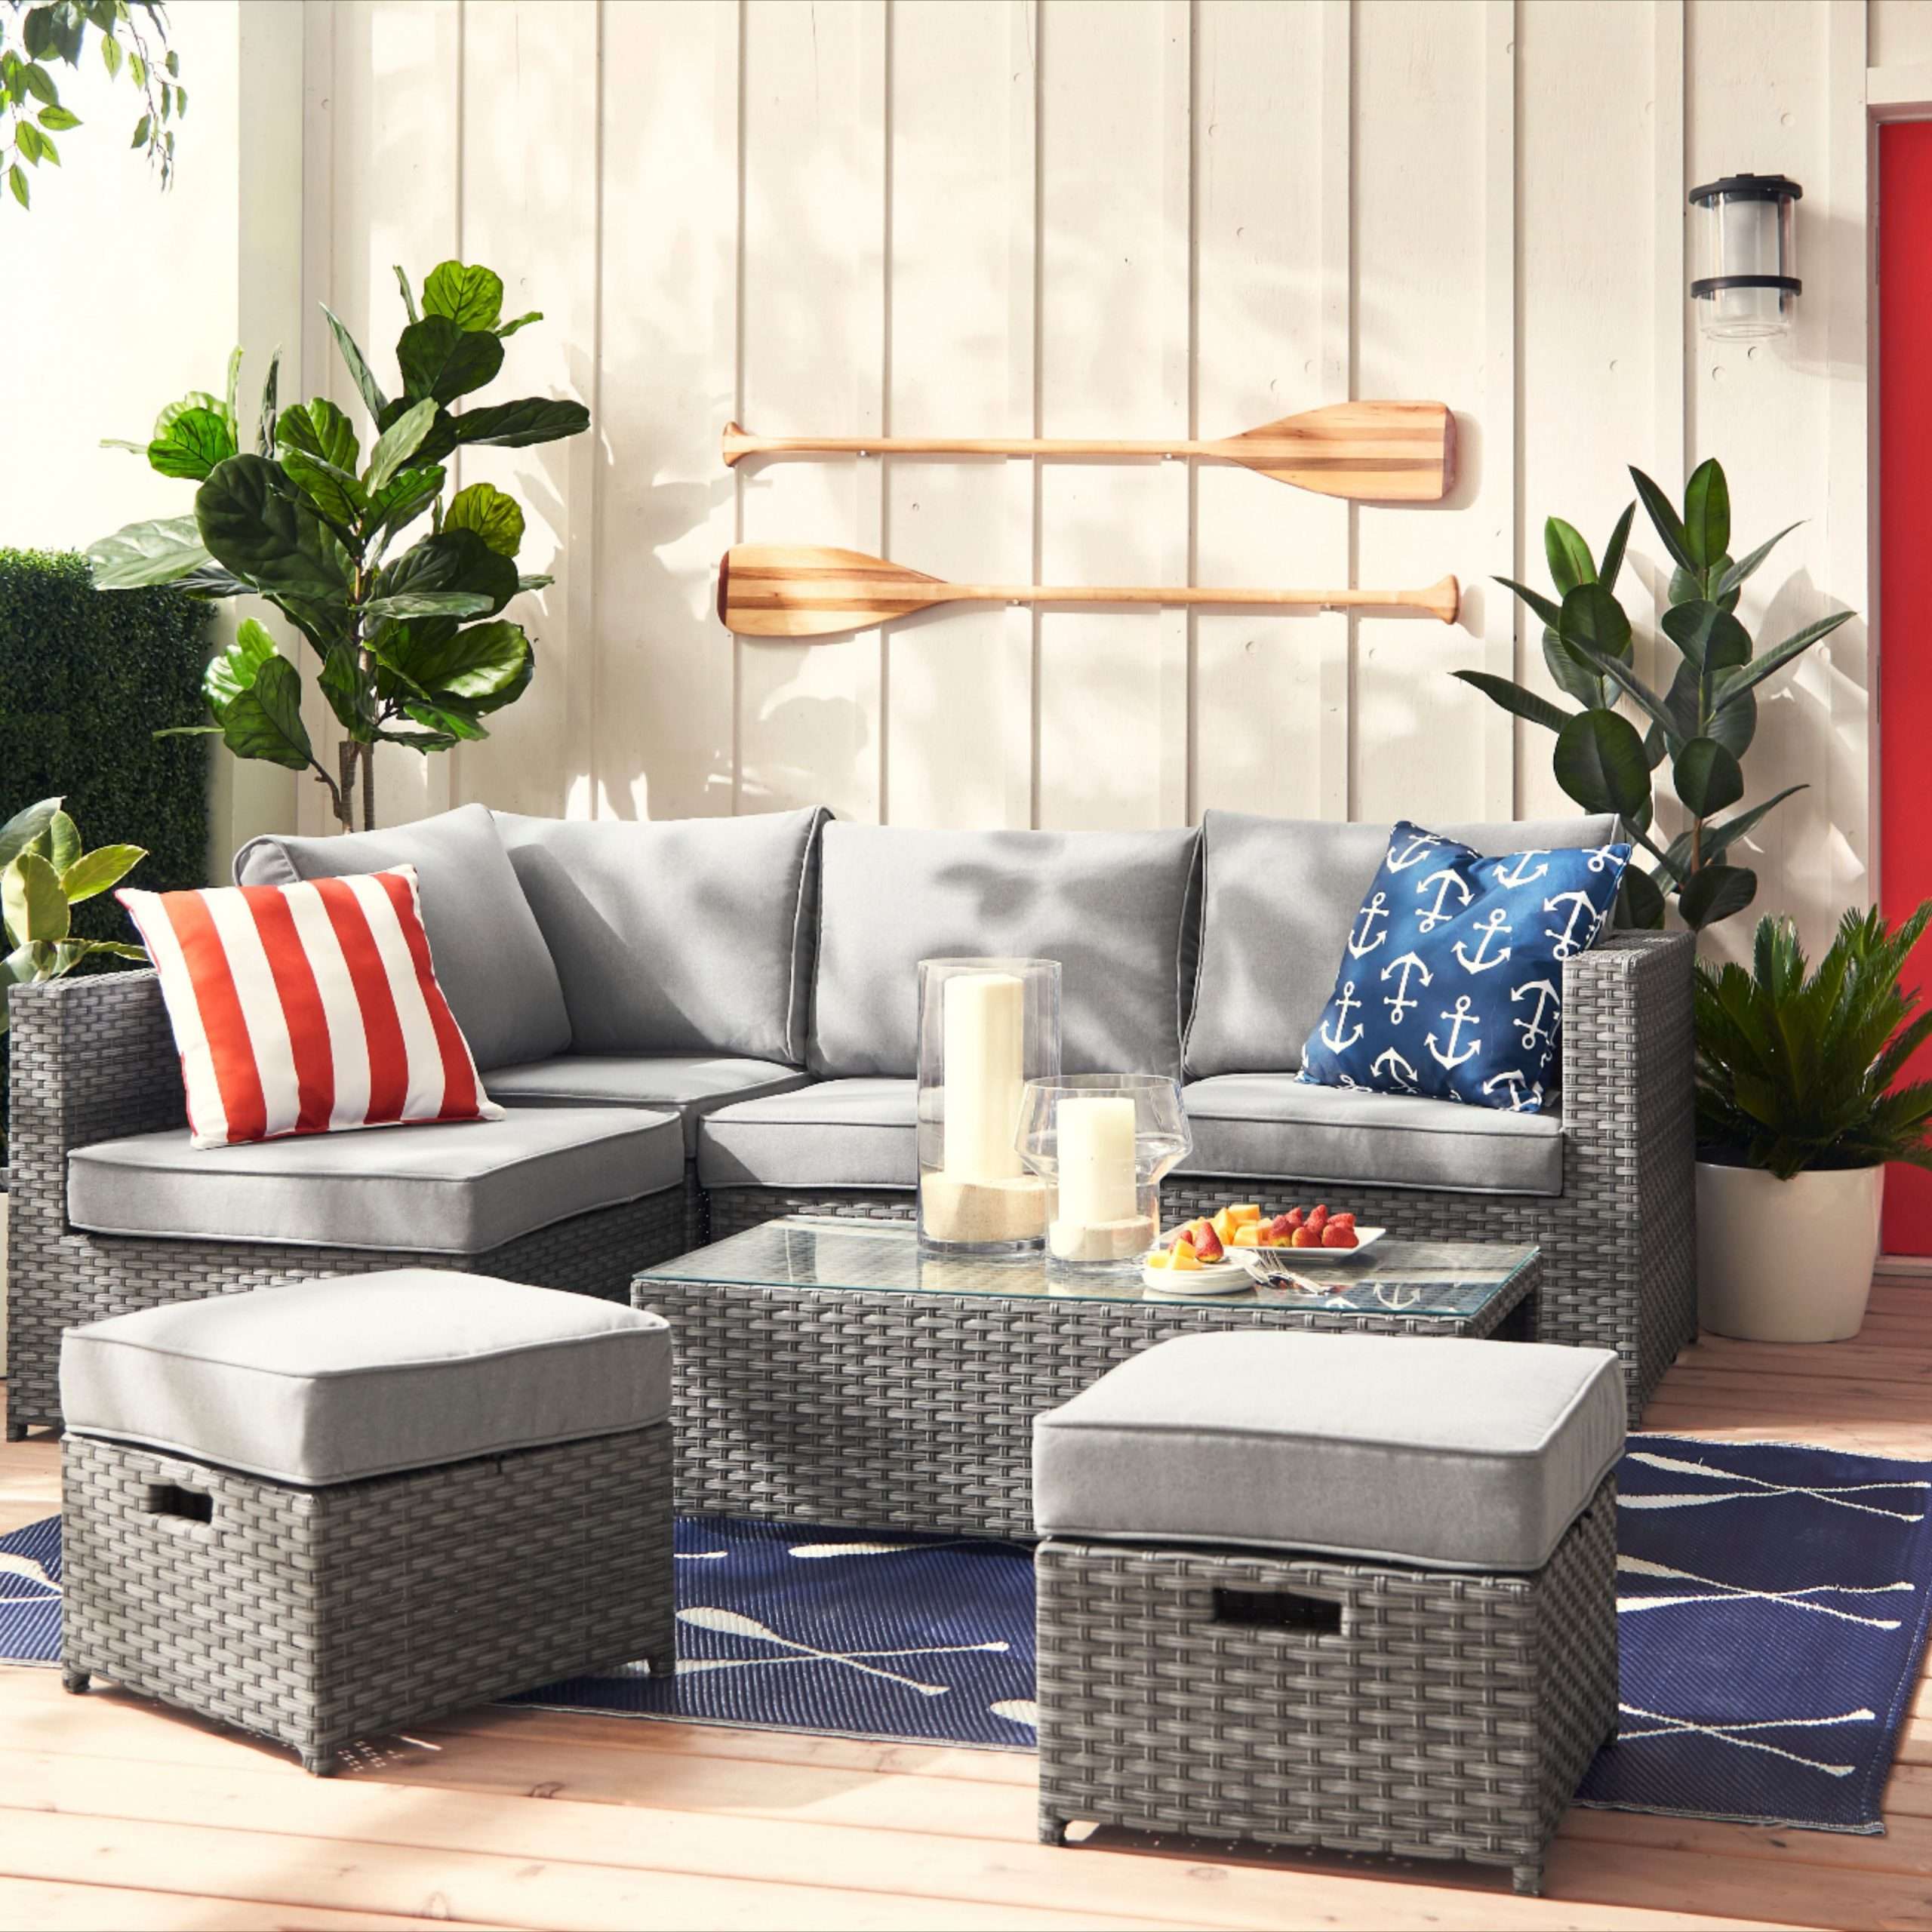 Get ready for patio season with our outdoor furniture ...